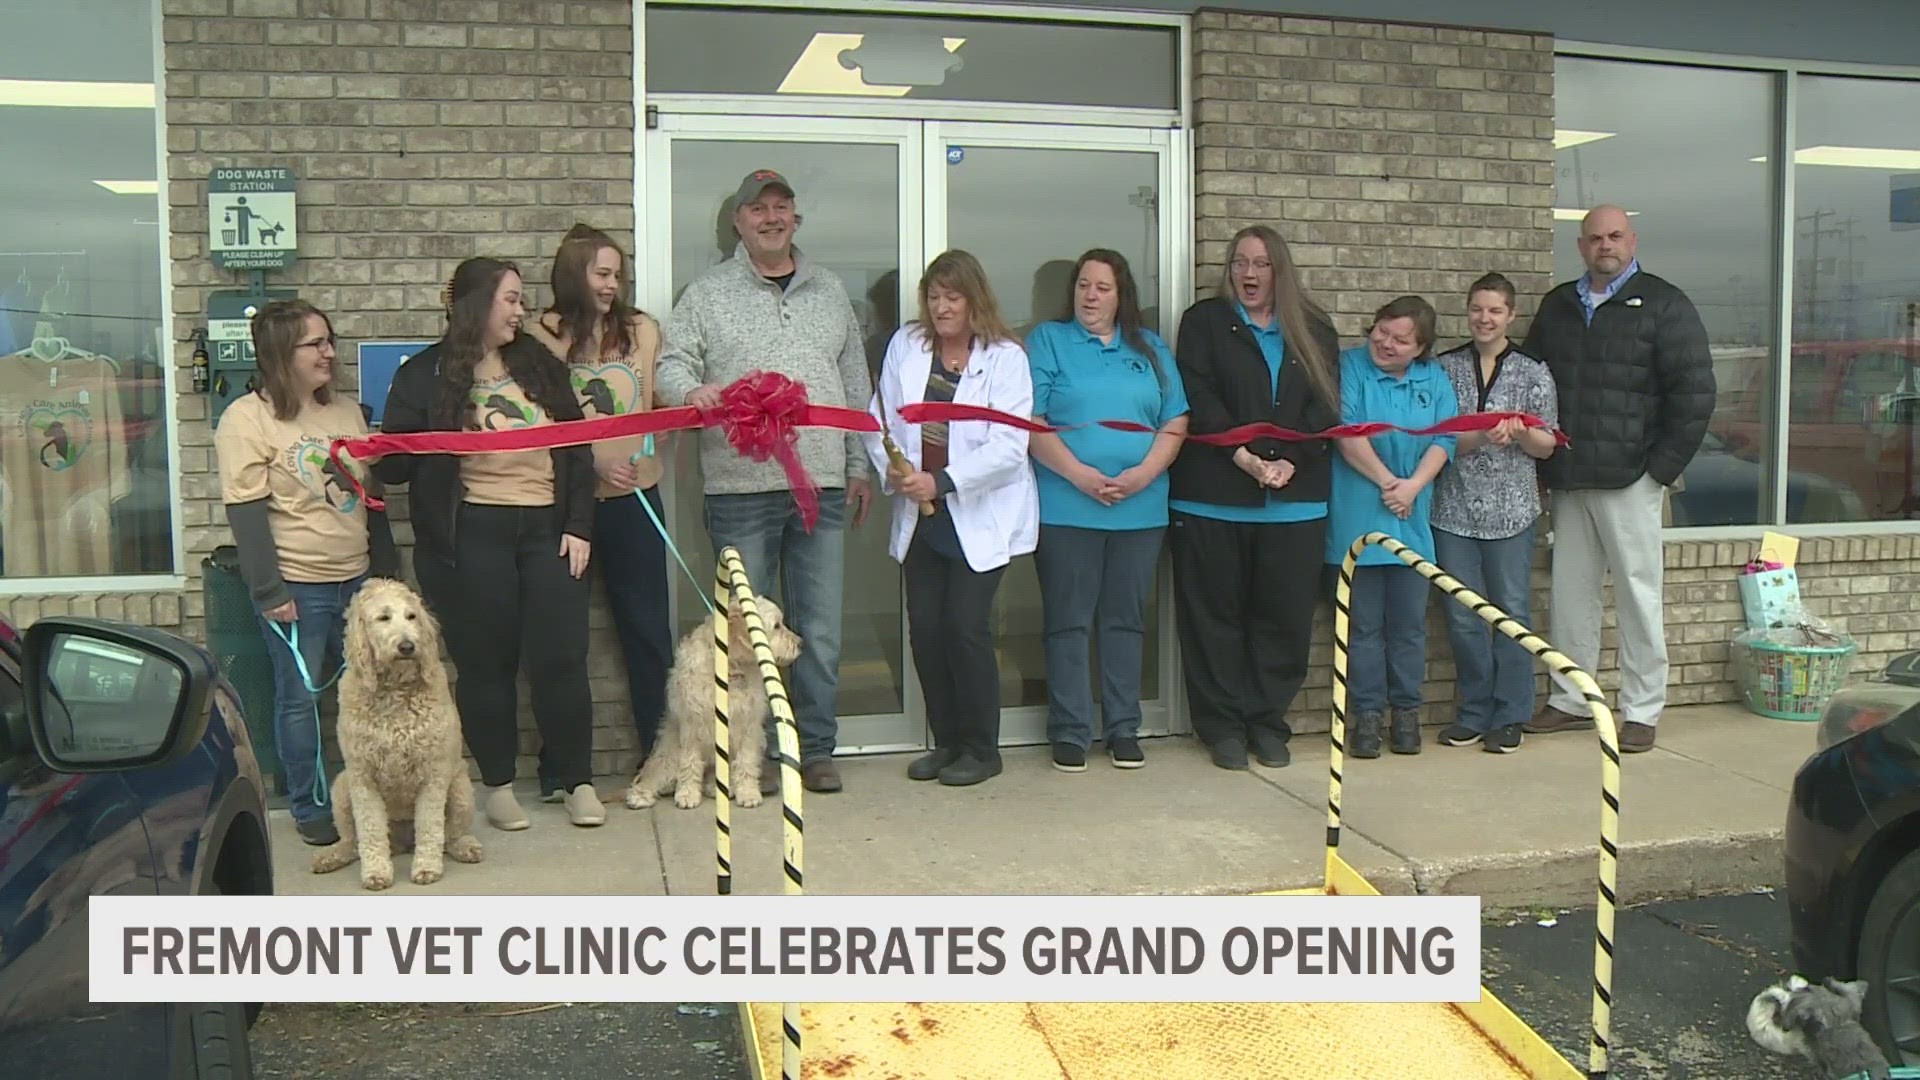 To celebrate the grand opening of the clinic, there is an open house on Saturday, April 1 from 11 a.m. to 3 p.m.